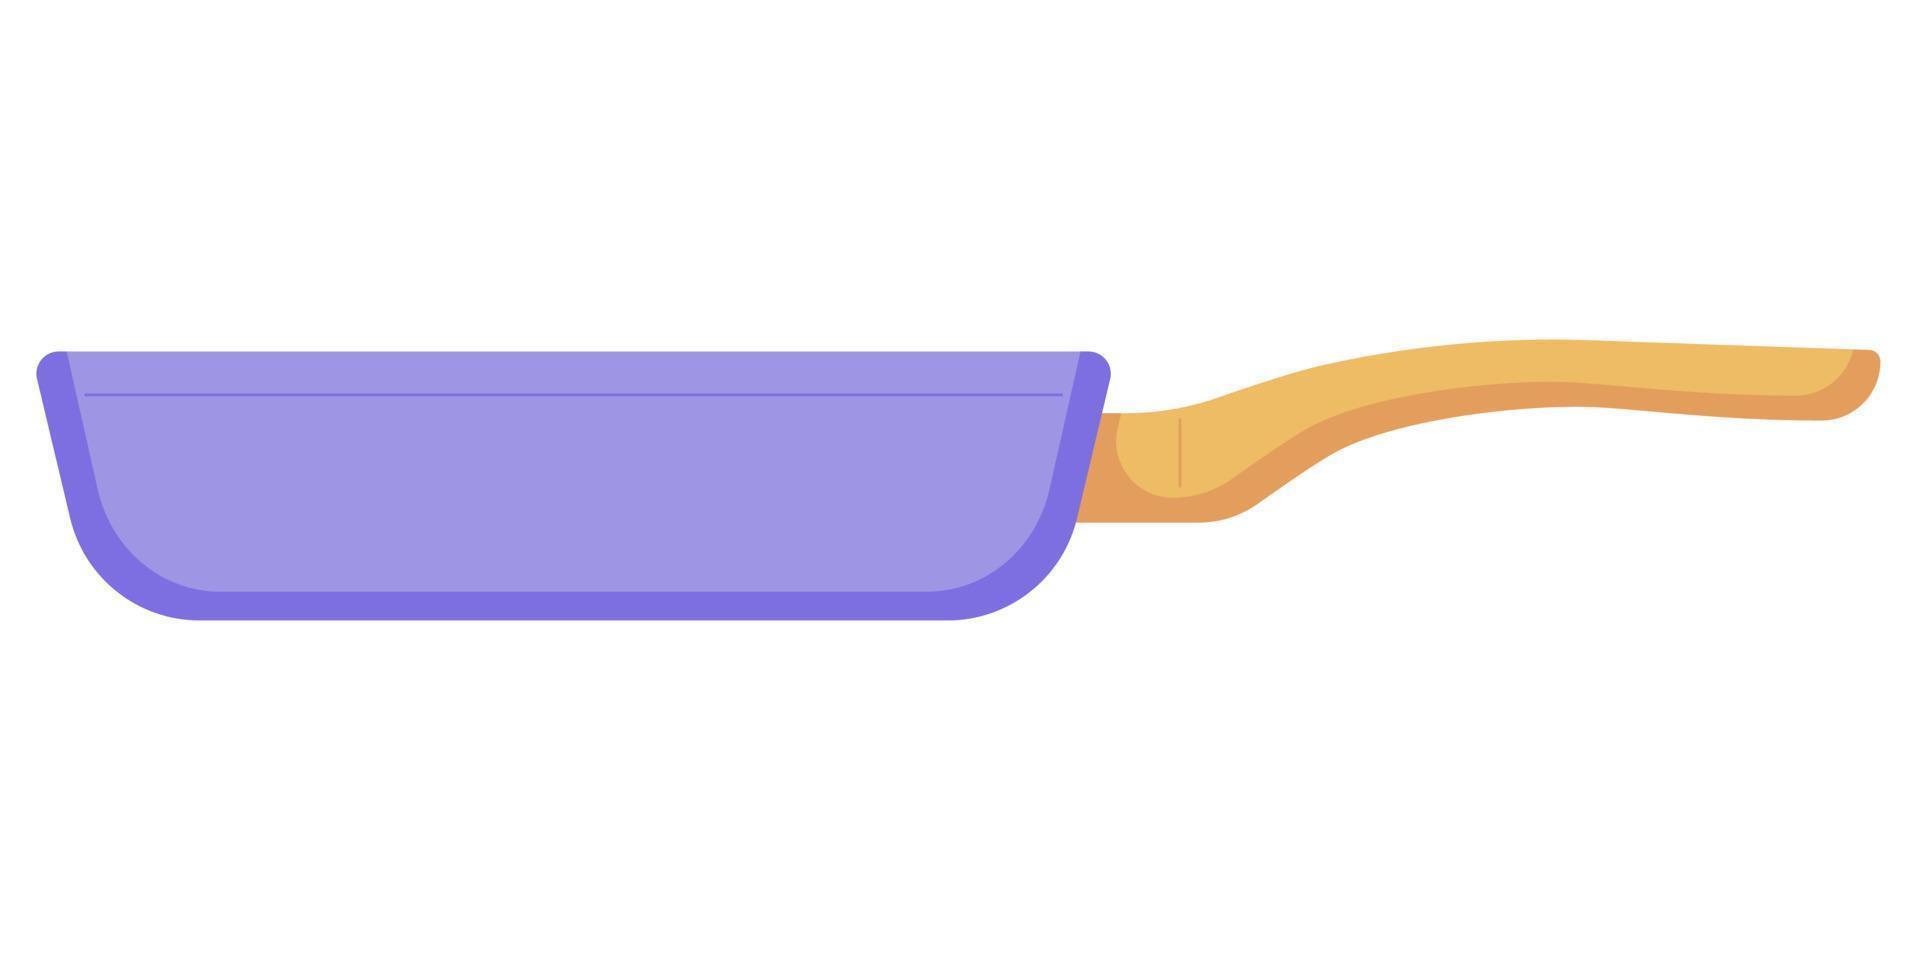 purple frying pan with yellow handle for cooking and frying in a flat style isolated on a white background. vector